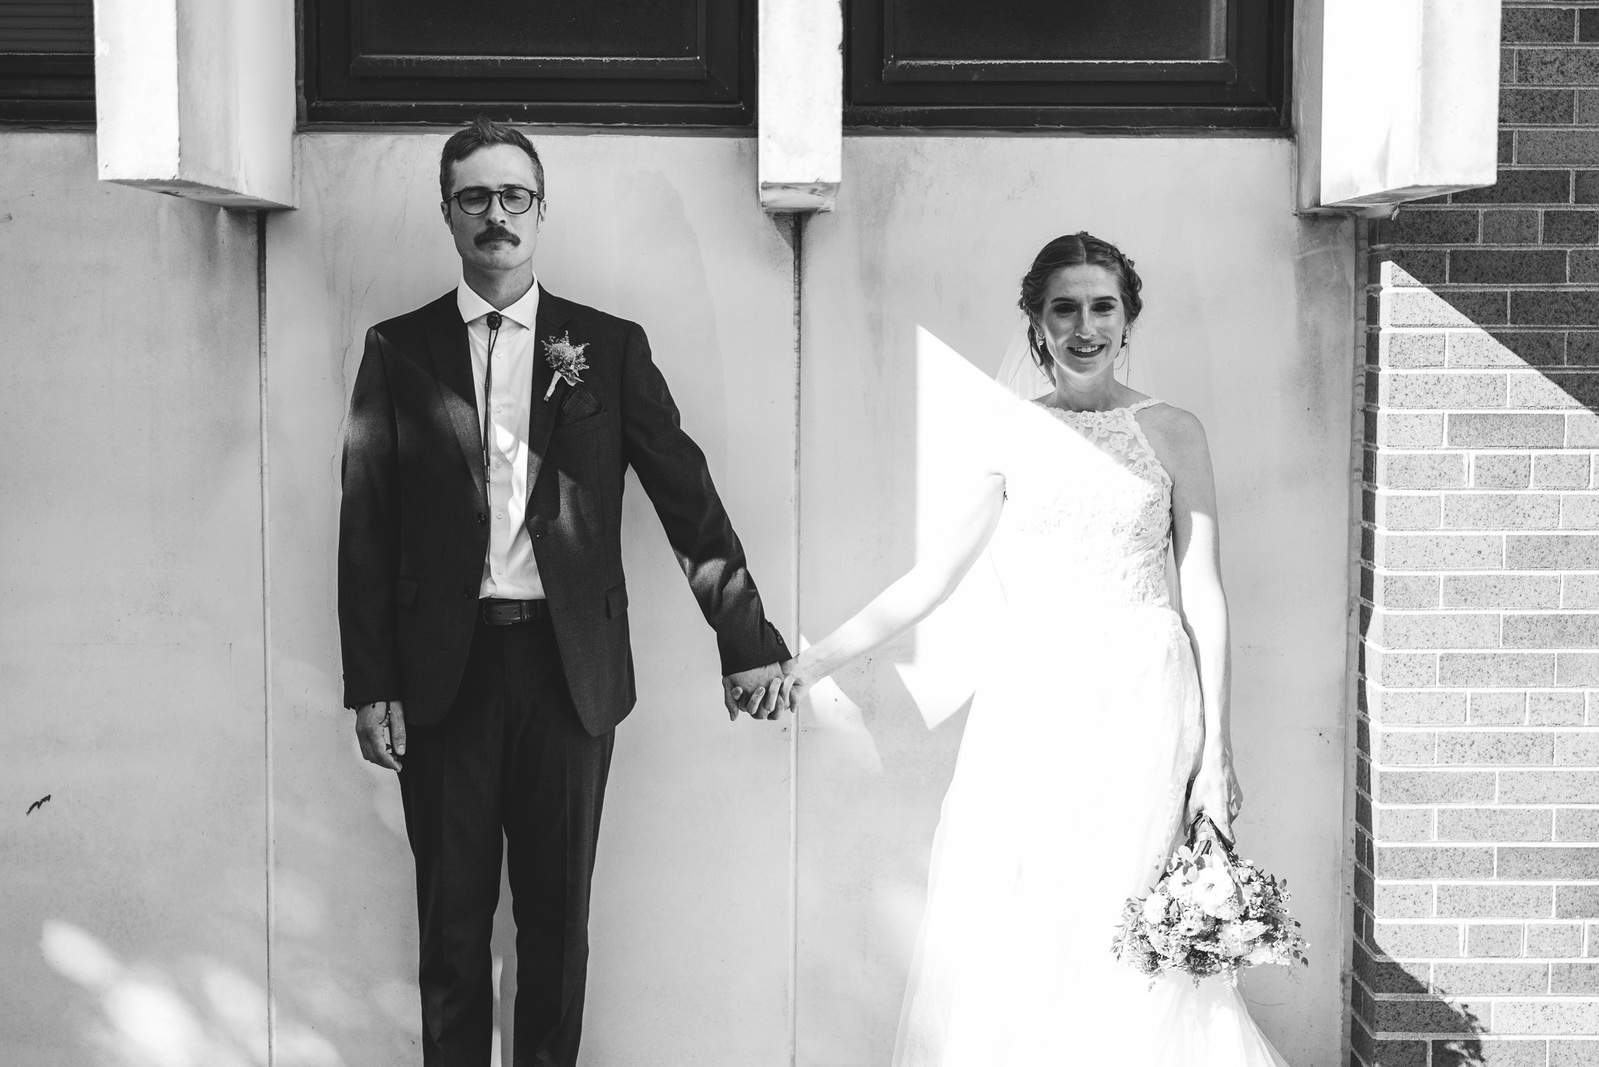 Milwaukee wedding with Bride and Groom portrait standing in front of wall with interesting architecture.  white wedding dress, dark grey suit.  Couple is holding hands and there are streaks of light shining across them.